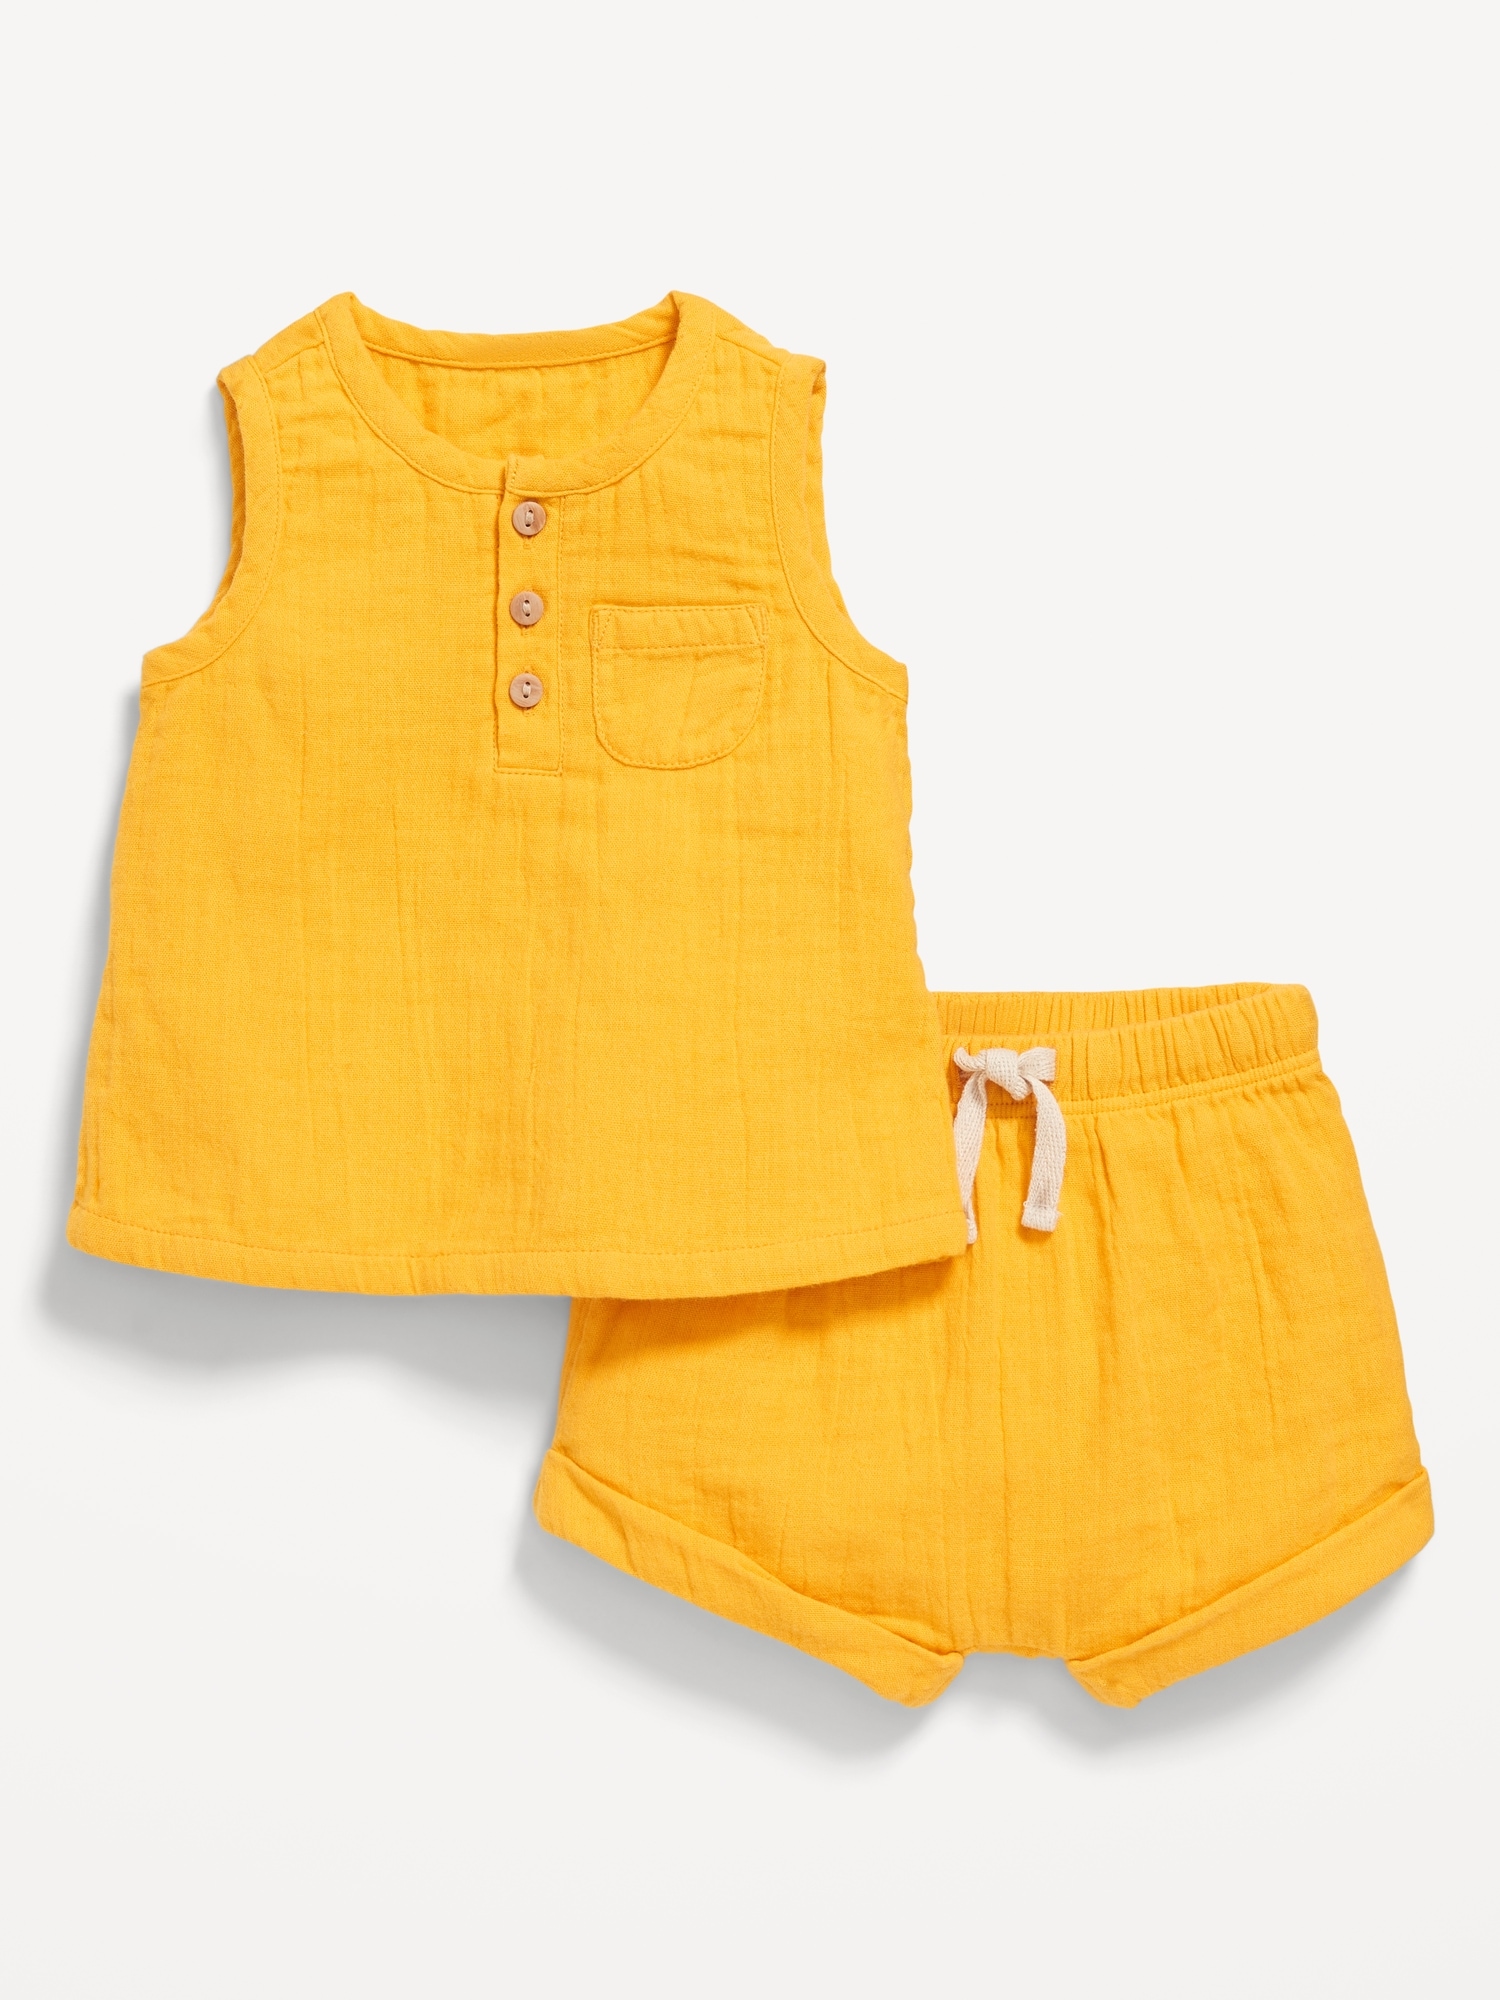 Unisex Double-Weave Tank Top and Shorts Set for Baby